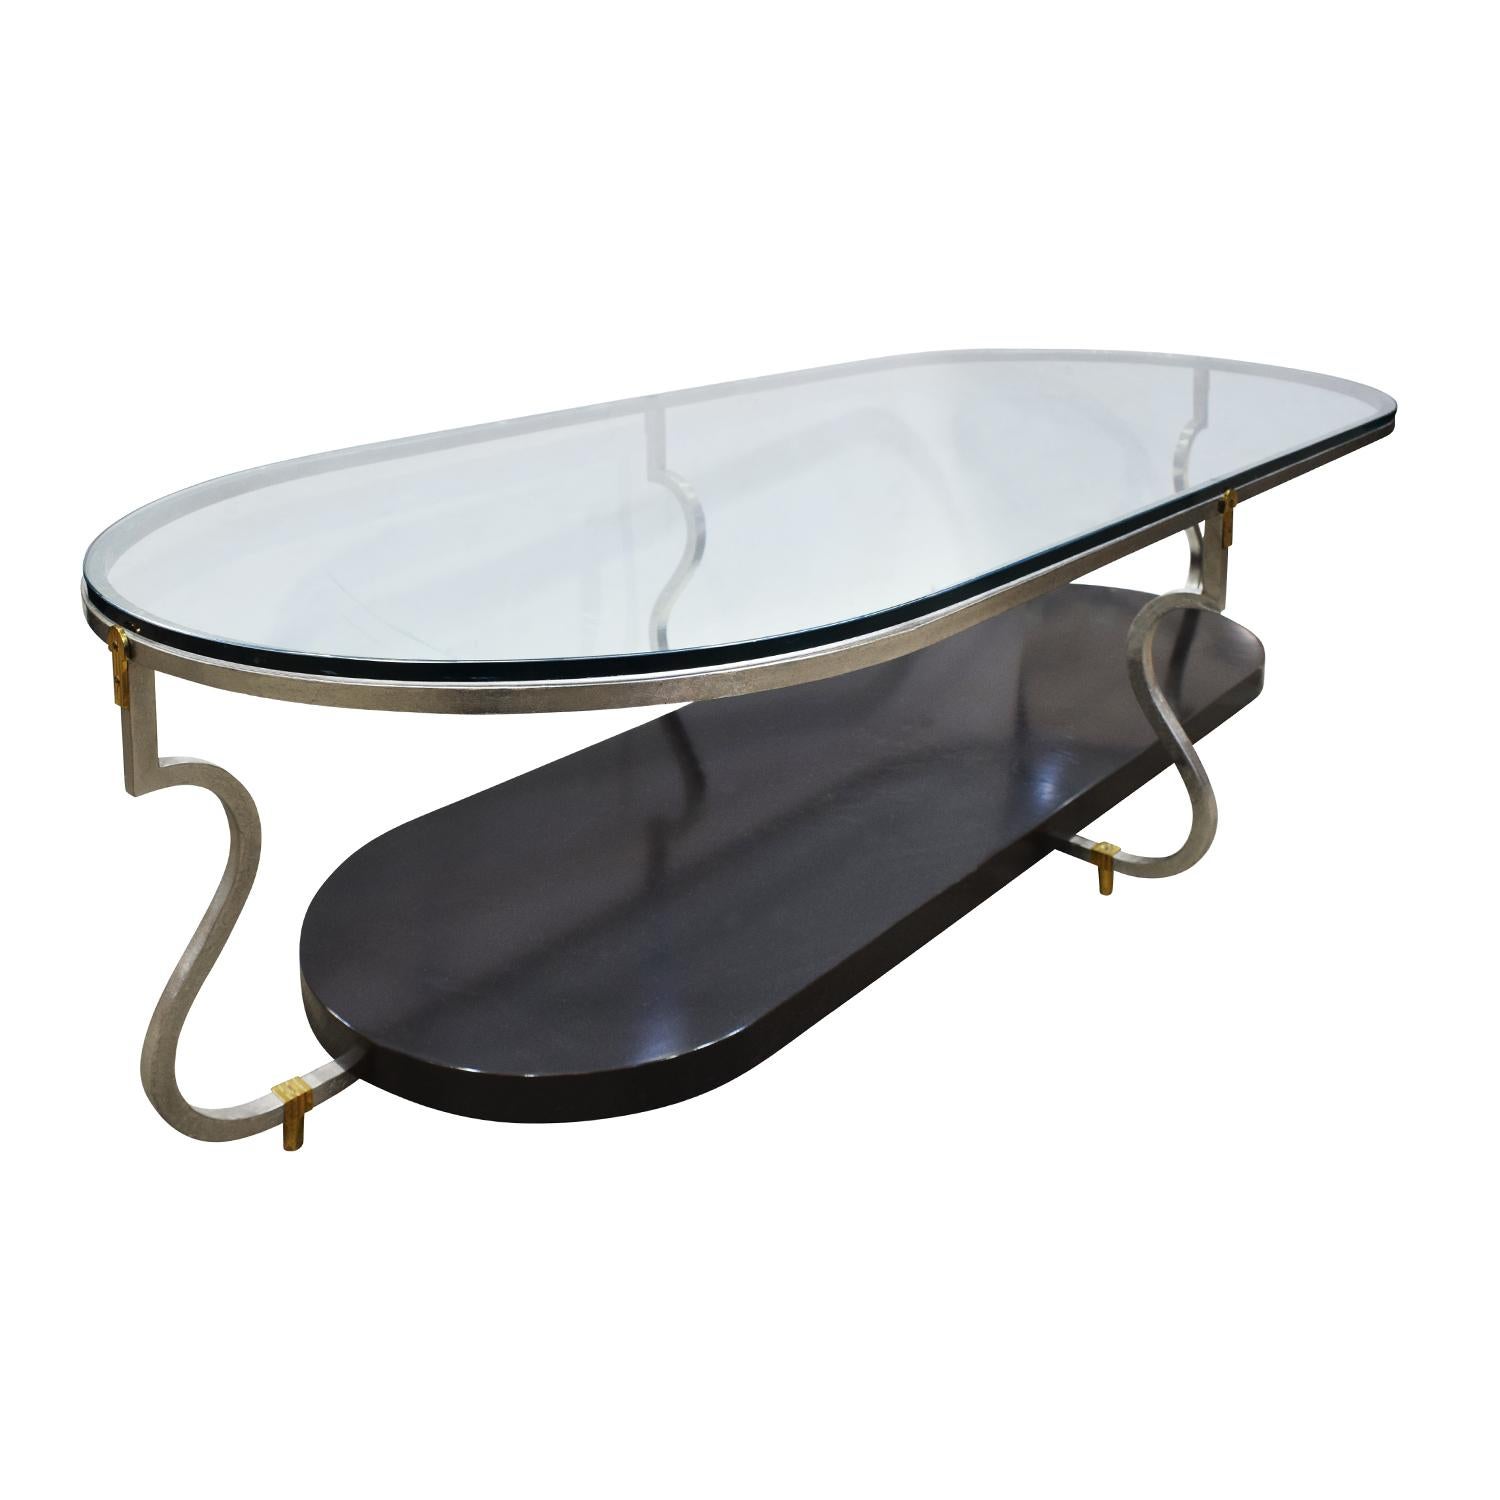 Coffee table No. 222 in silver leaf over steel with brass accents, black lacquer base and inset glass top with by Tommi Parzinger for Parzinger Originals, American, 1960s. This coffee table is extremely elegant and a fine example of Parzinger’s